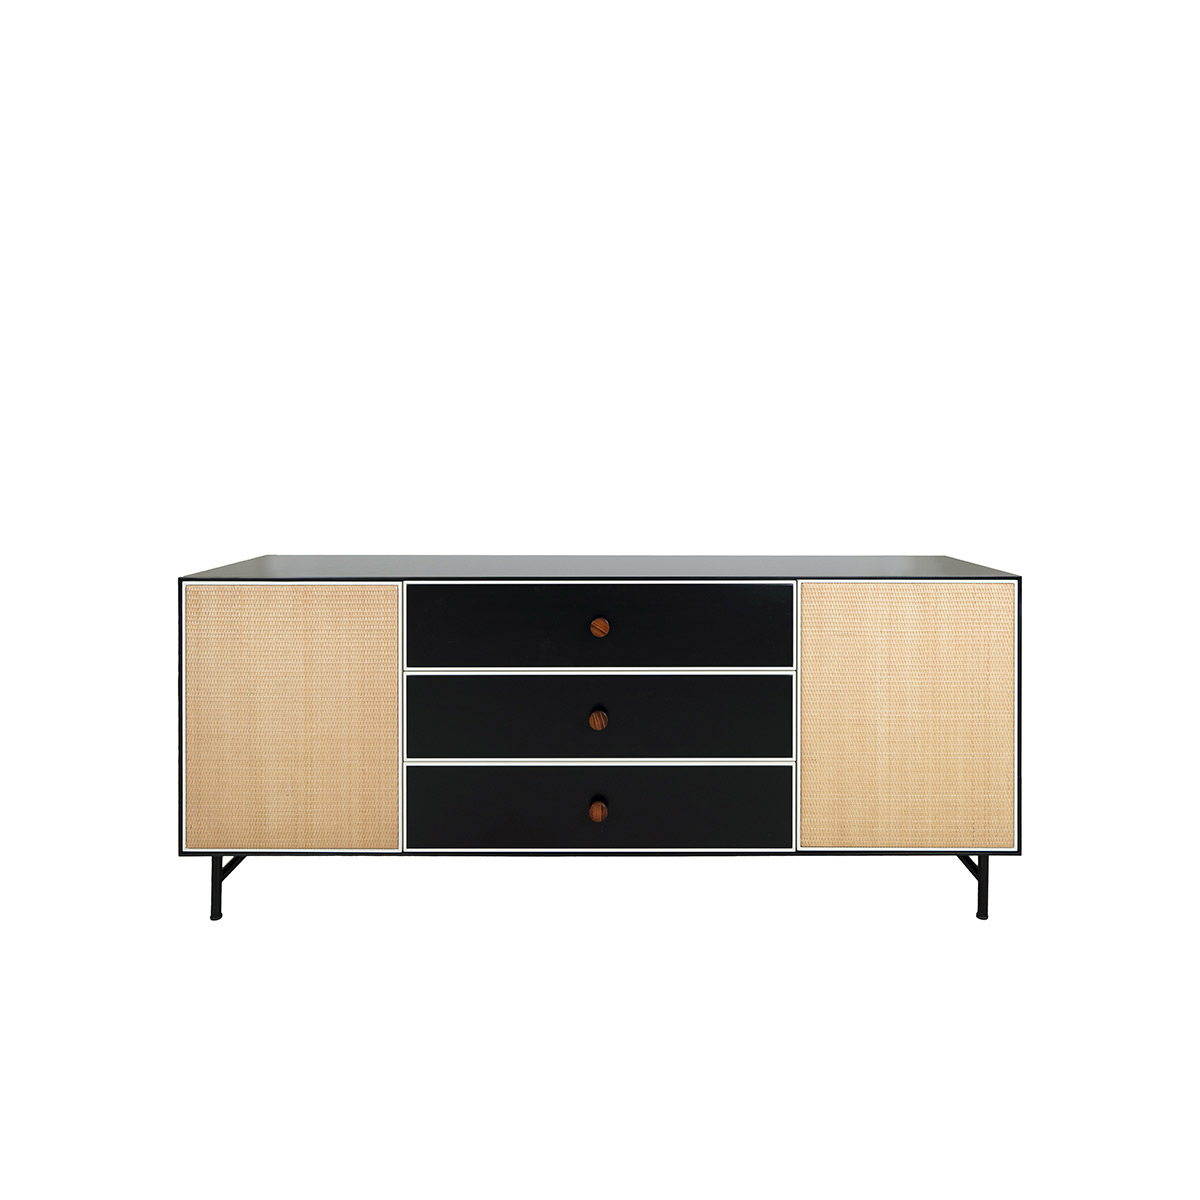 Sideboard Essence, Black / Ivory - L180 x W45 x H75 cm - Lacquered wood - image 1